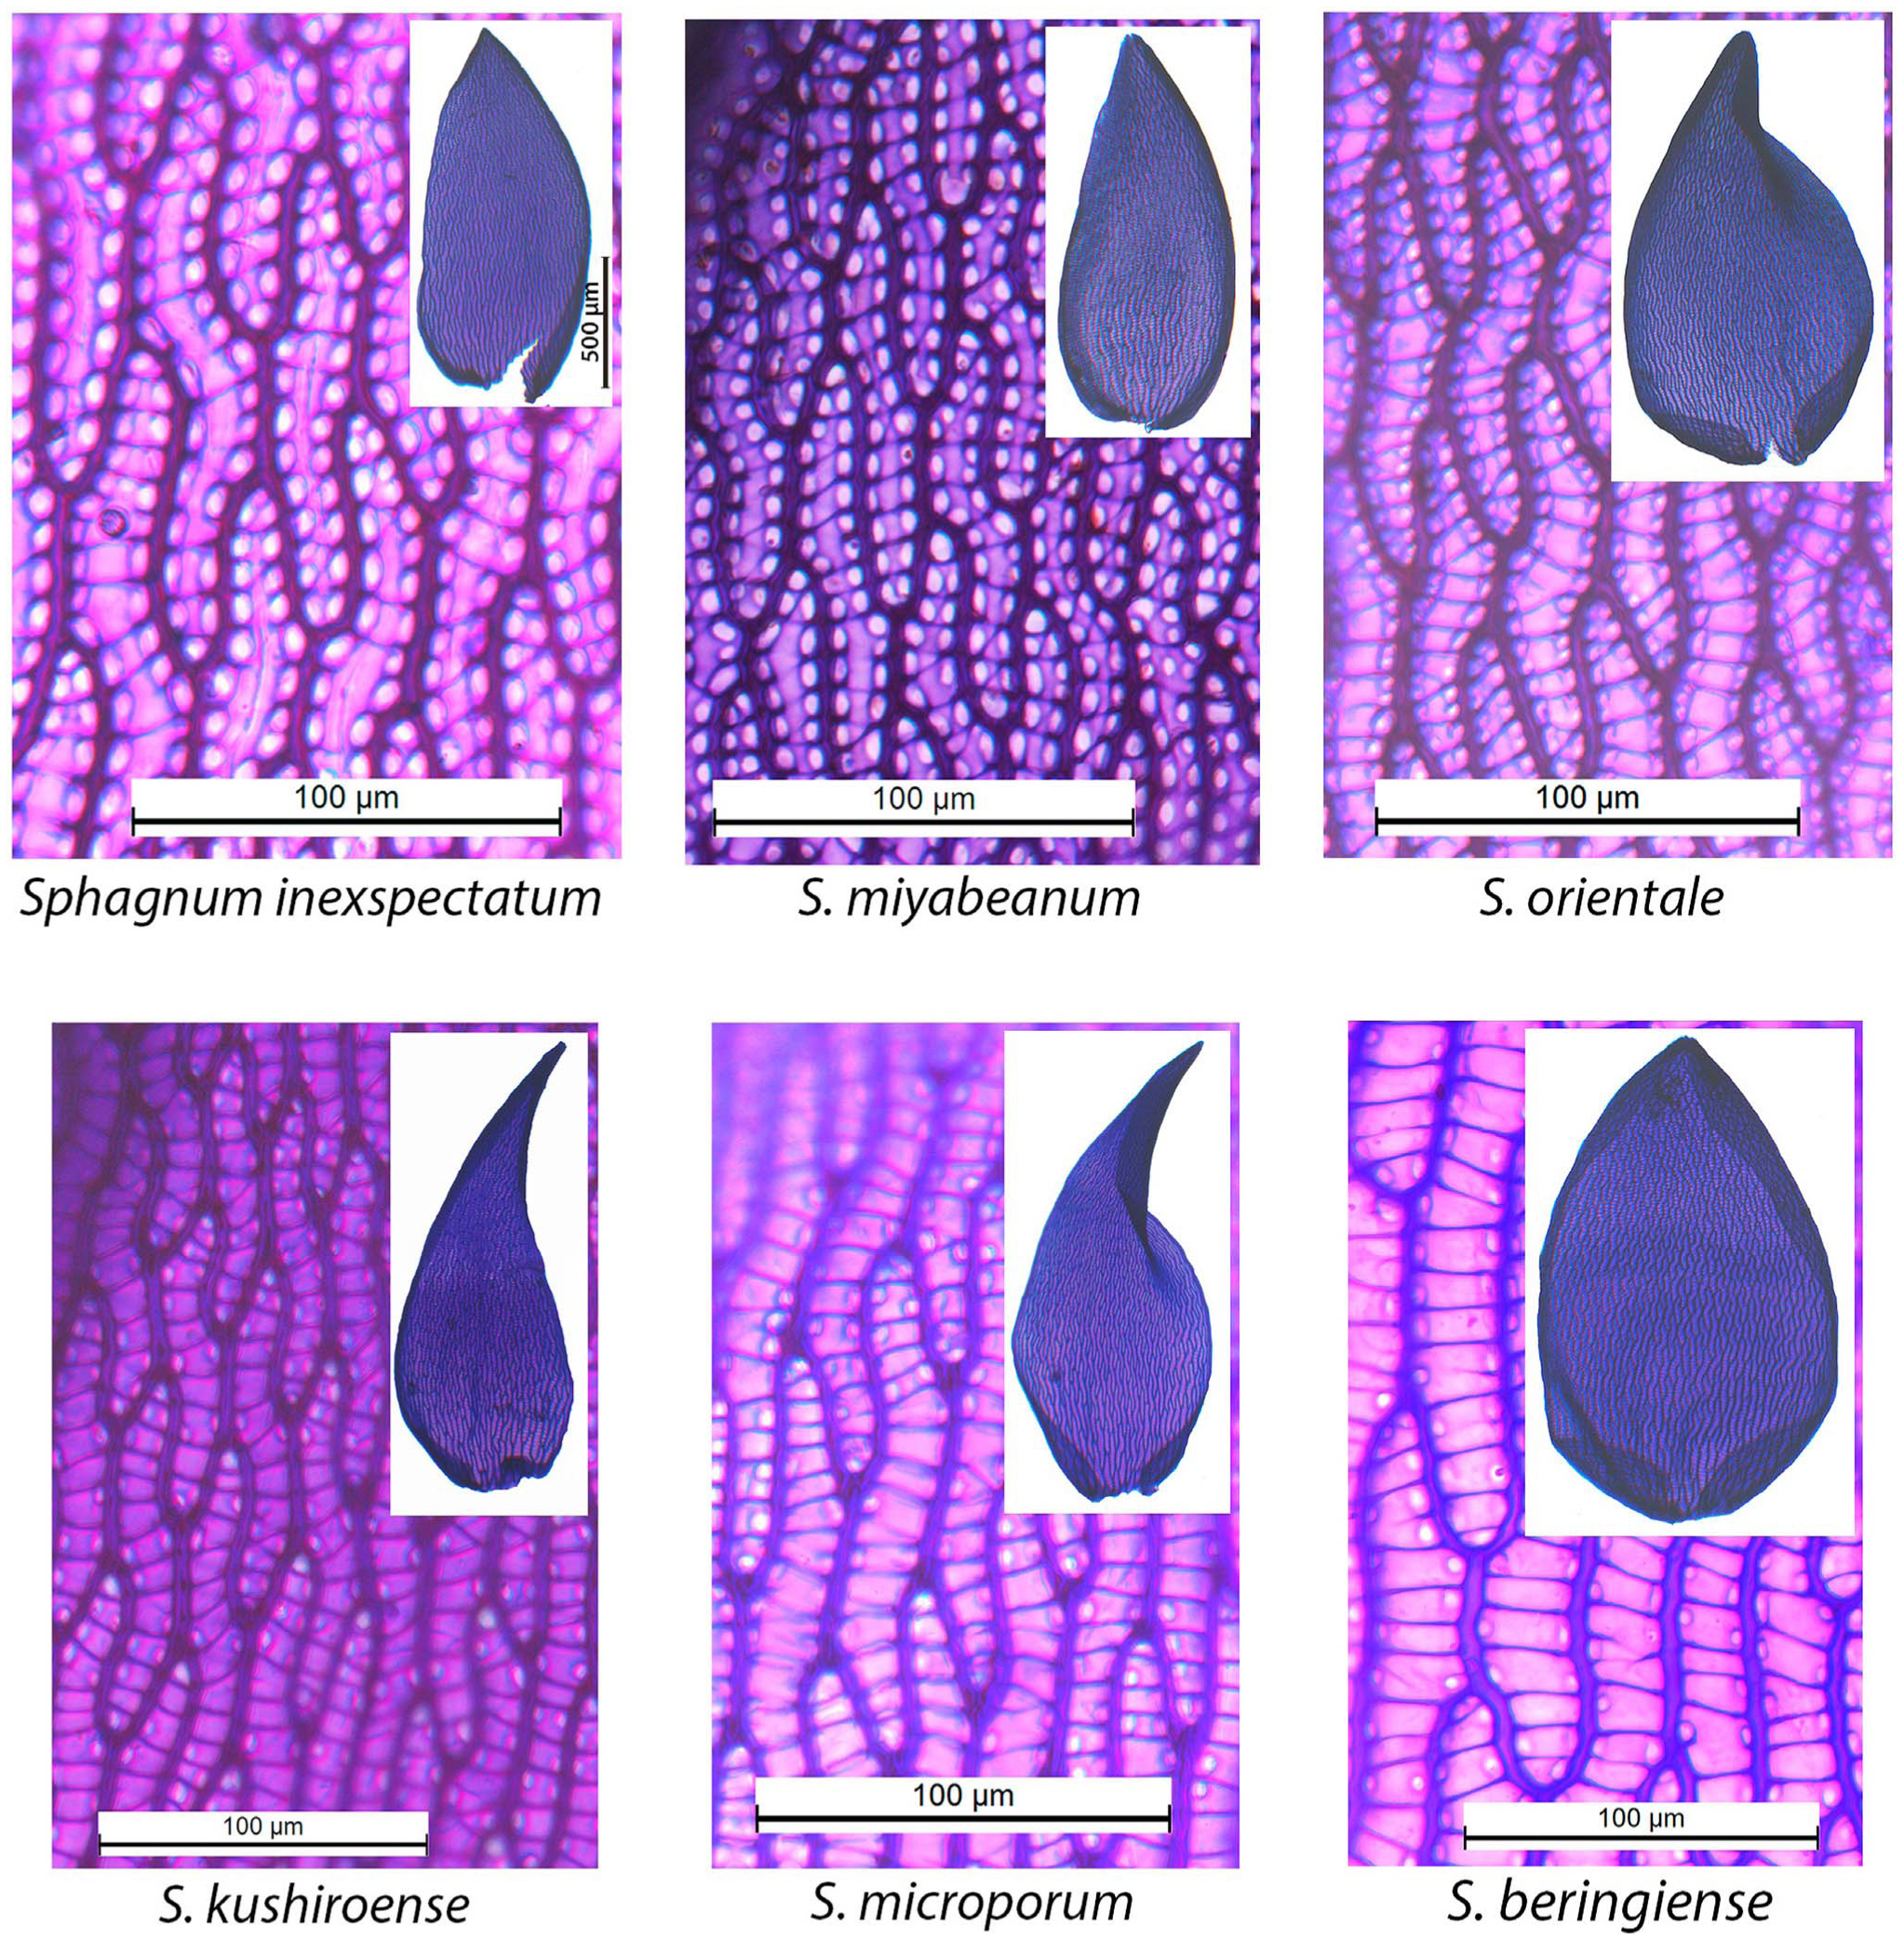 Sphagnum moss structures and soil pore sizes. (a) Sphagnum lawn